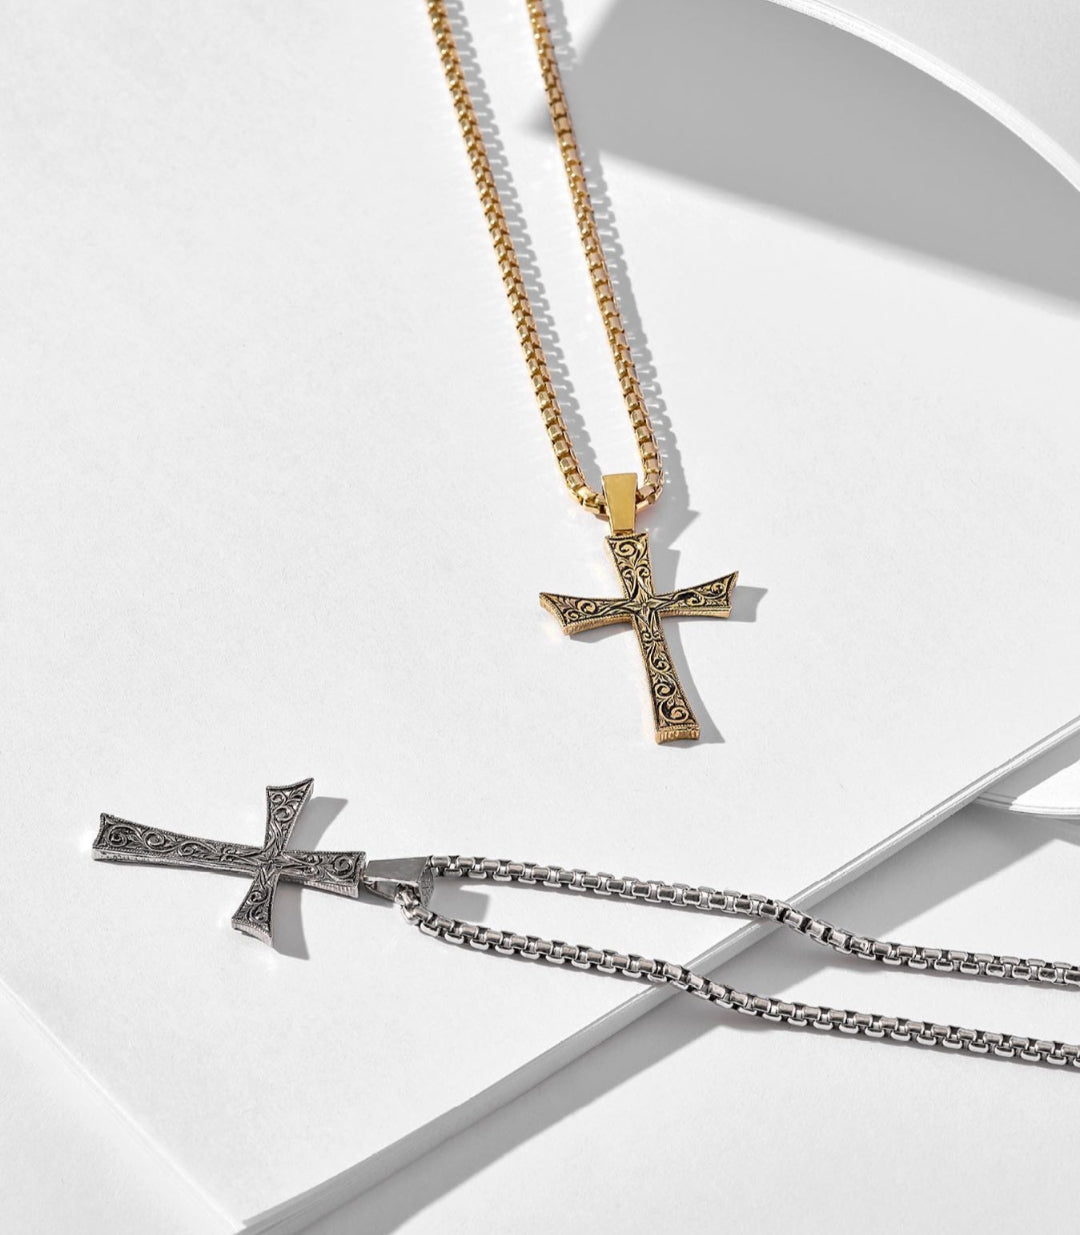 RARE PRINCE by CARAT SUTRA | Unique Classic Cross Pendant with Engraved Design, 925 Sterling Silver Pendant | Men's Jewelry | With Certificate of Authenticity and 925 Hallmark - caratsutra